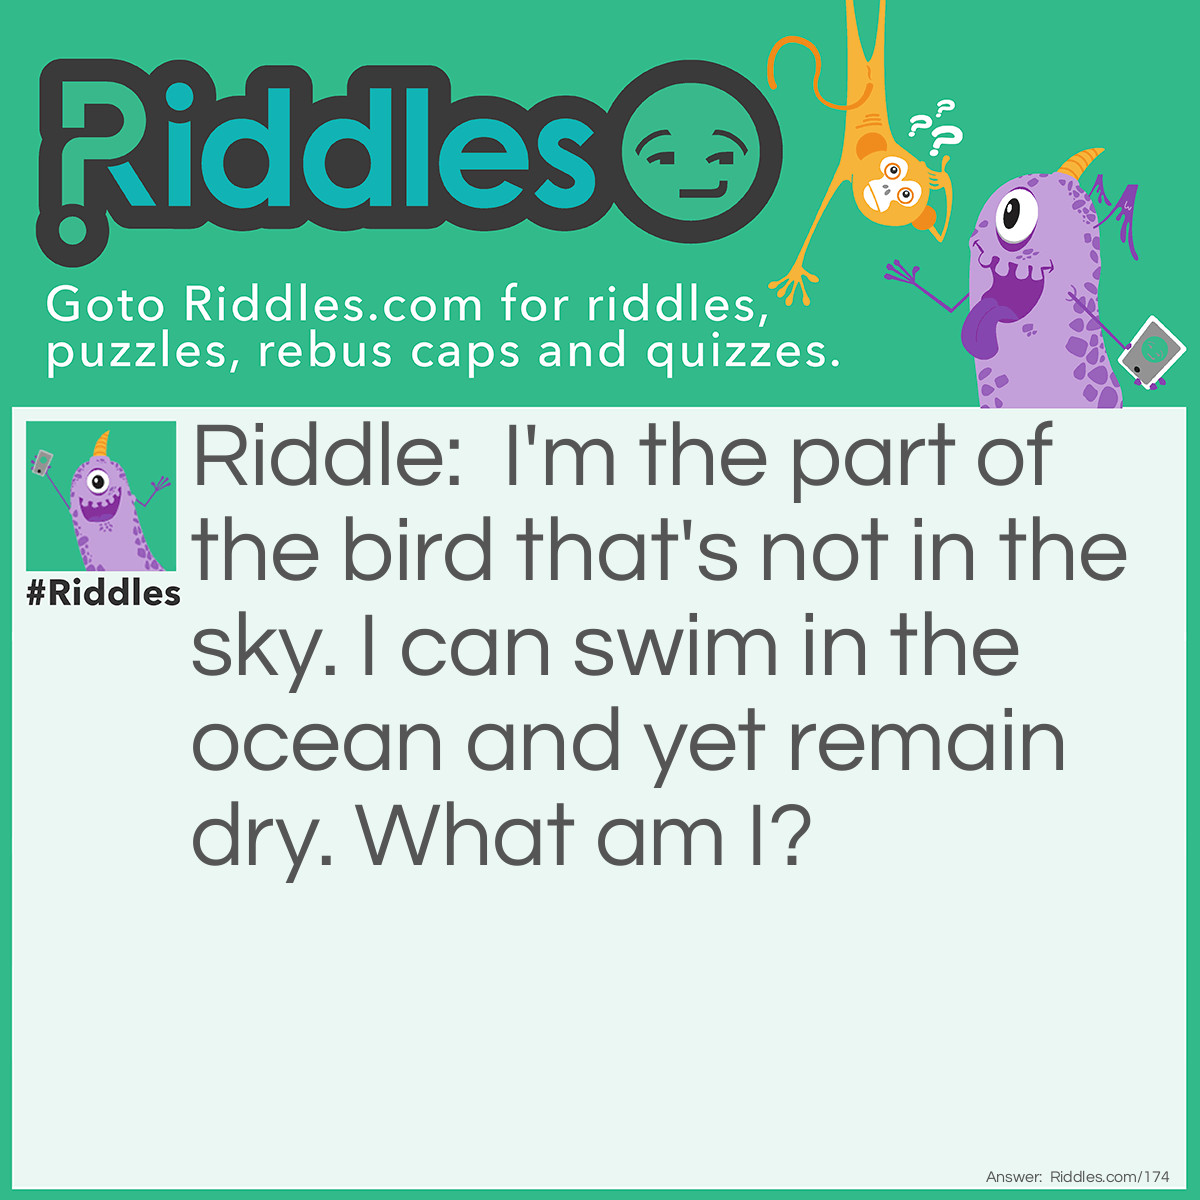 Riddle: I'm the part of the bird that's not in the sky. I can swim in the ocean and yet remain dry. What am I? Answer: I am the birds shadow.